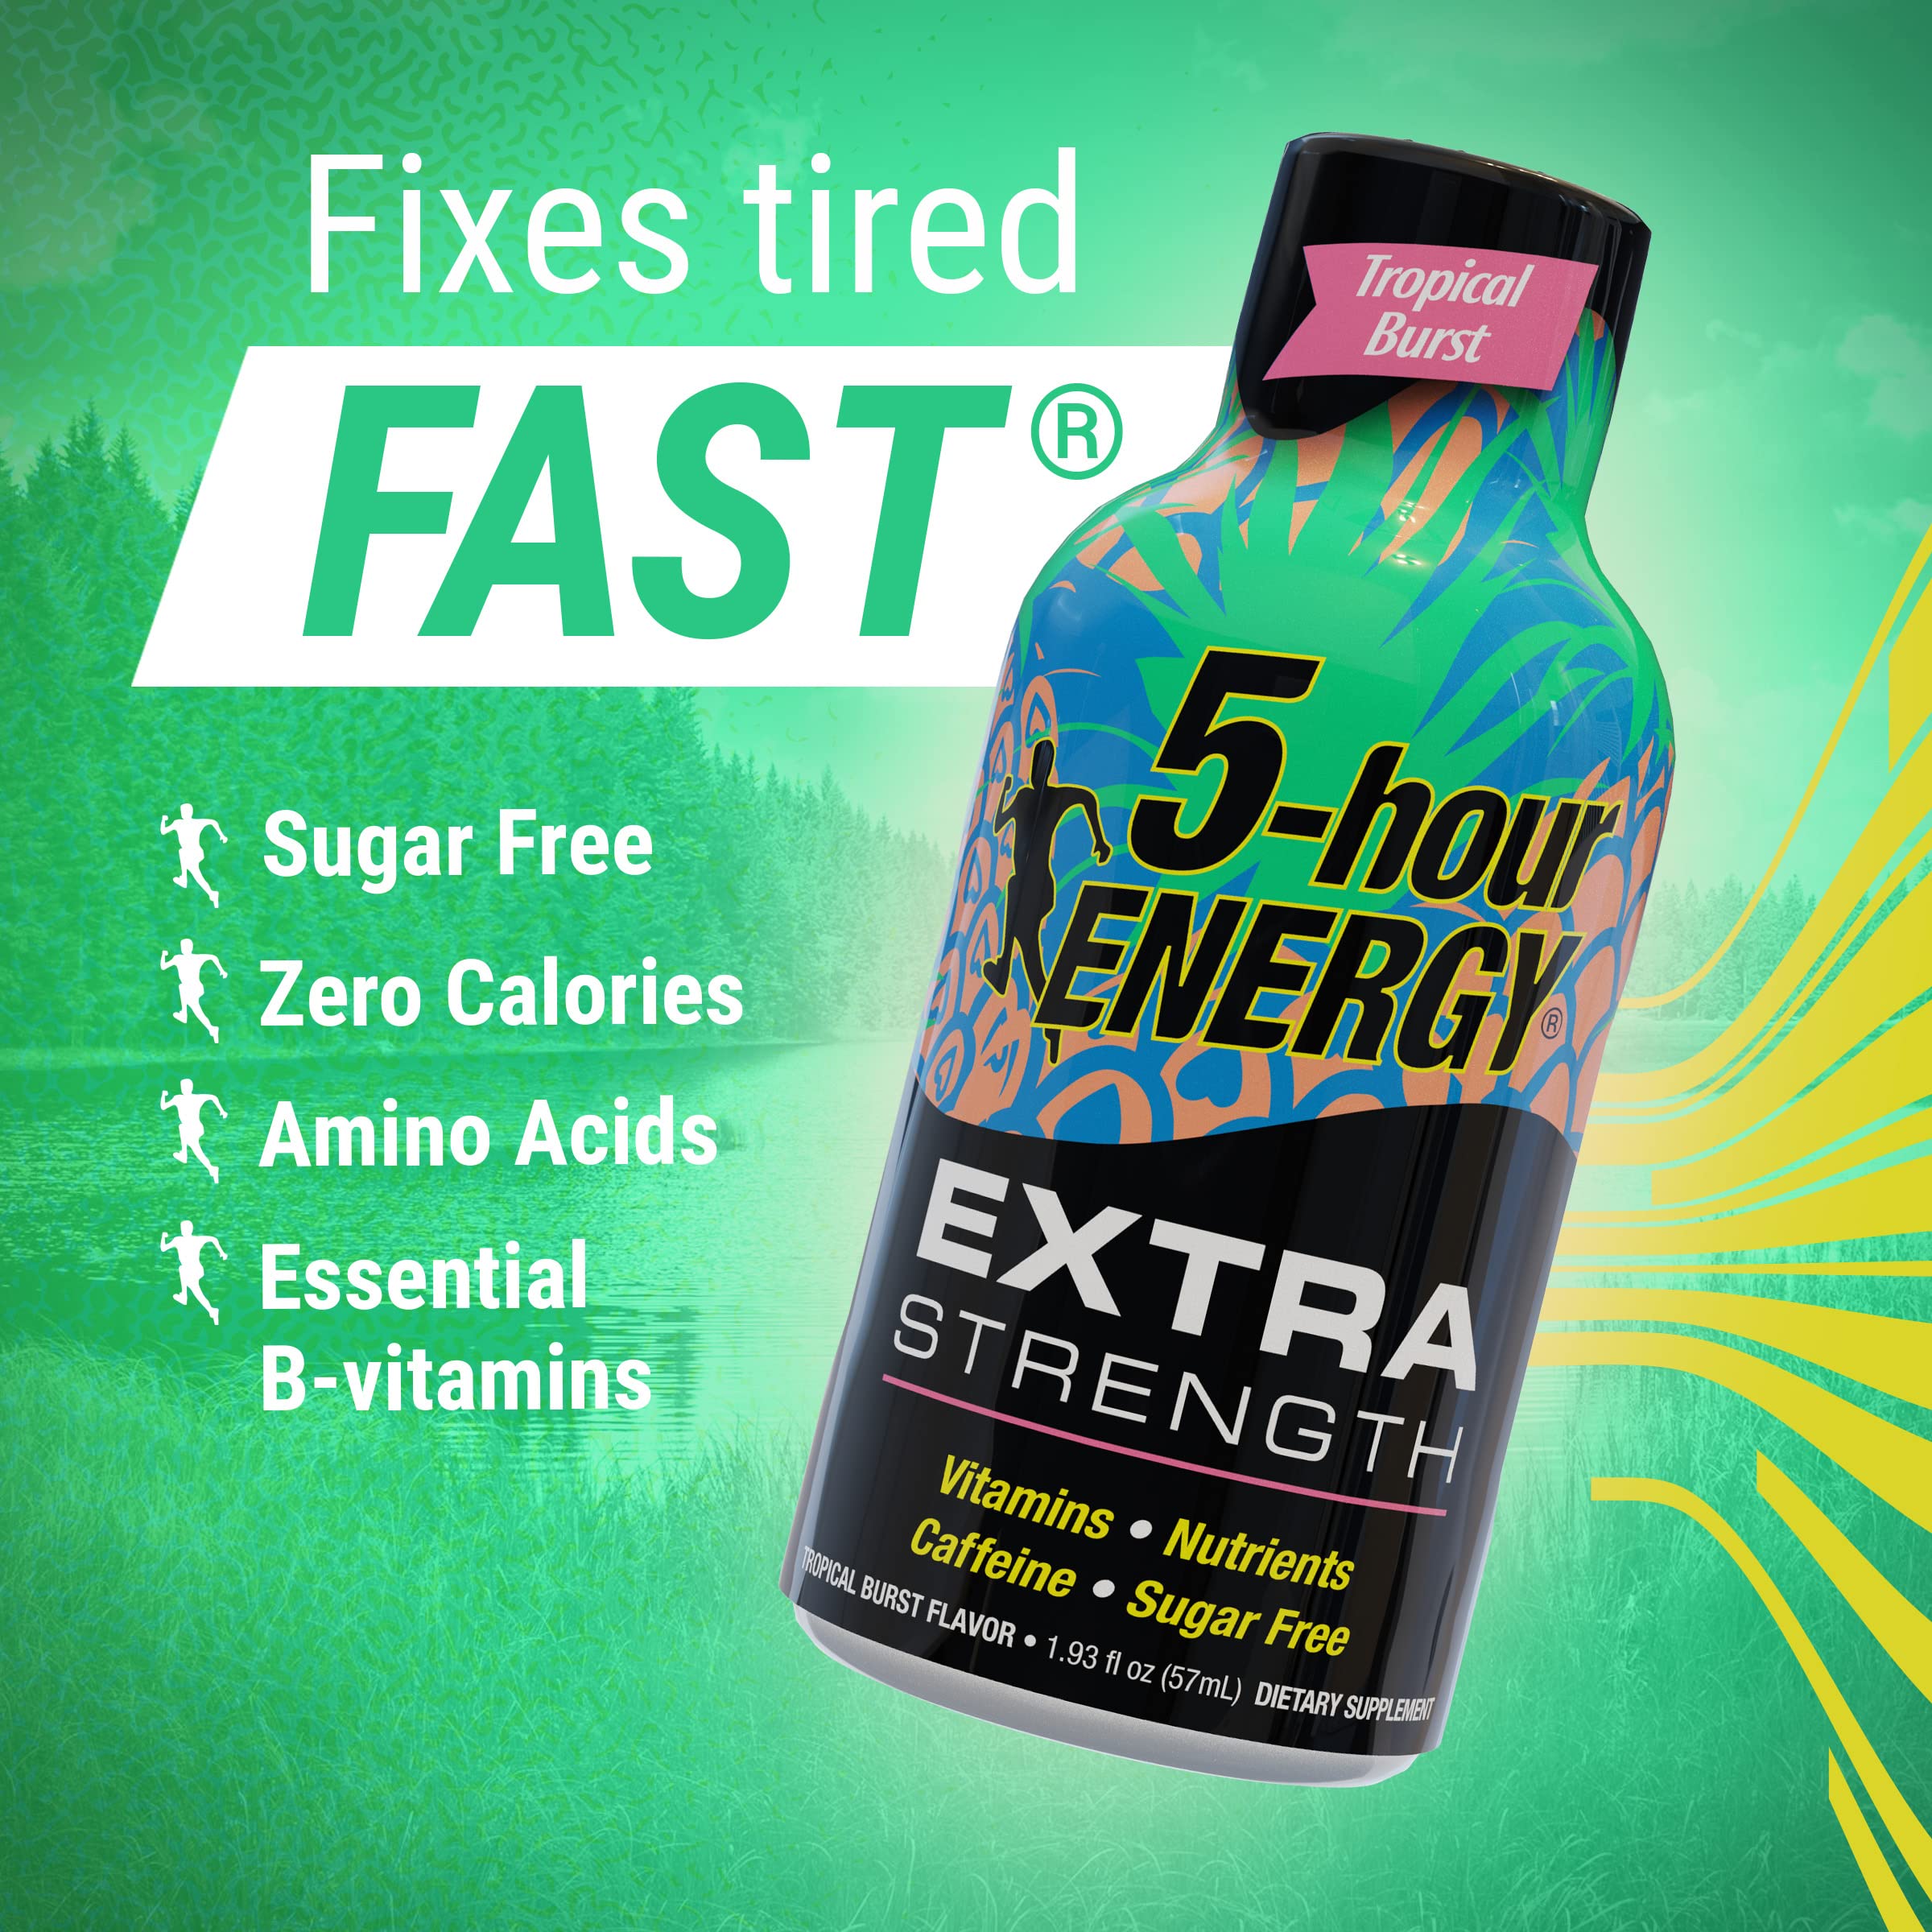 5-Hour ENERGY Shots Extra Strength | Tropical Blast Flavor | 1.93 oz. 30 Count | Sugar Free 4 Calories | Amino Acids and Essential B Vitamins | Dietary Supplement | Feel Alert and Energized